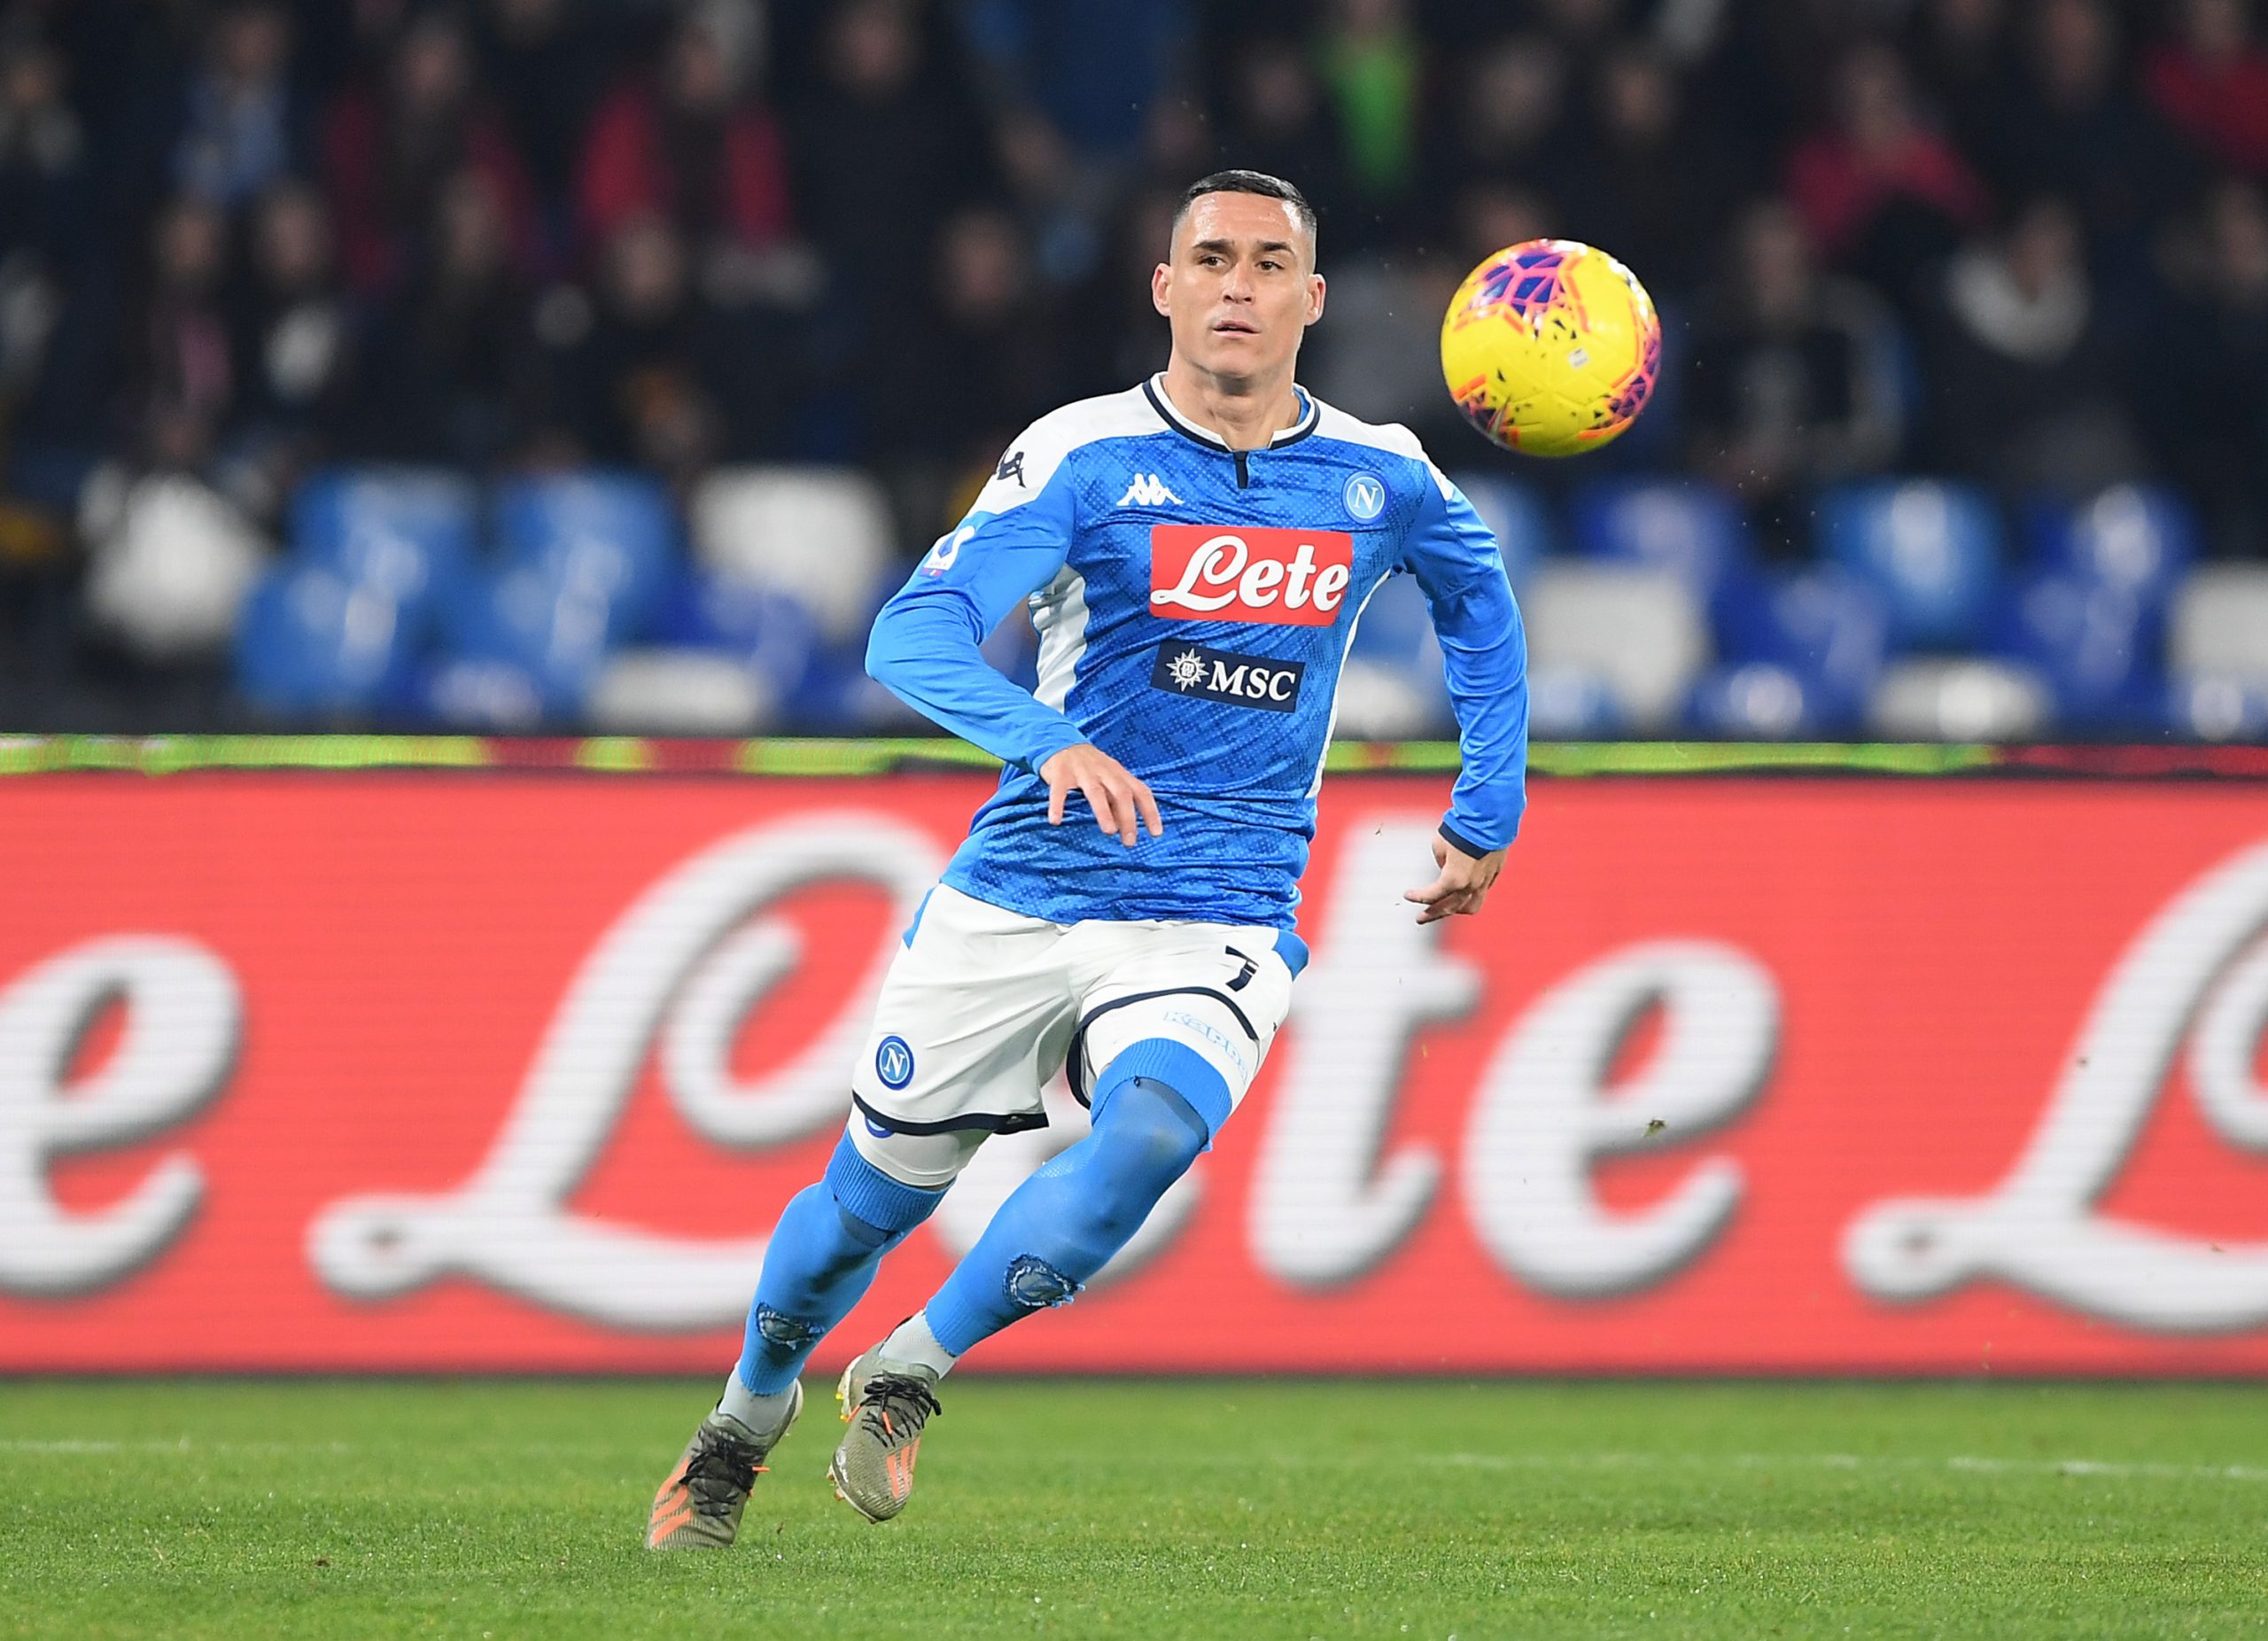 Josè Callejon of SSC Napoli during the Serie A match between SSC Napoli and  ACF Fiorentina at Stadio San Paolo on January 18, 2020 in Naples, Italy. (Photo by Francesco Pecoraro/Getty Images)